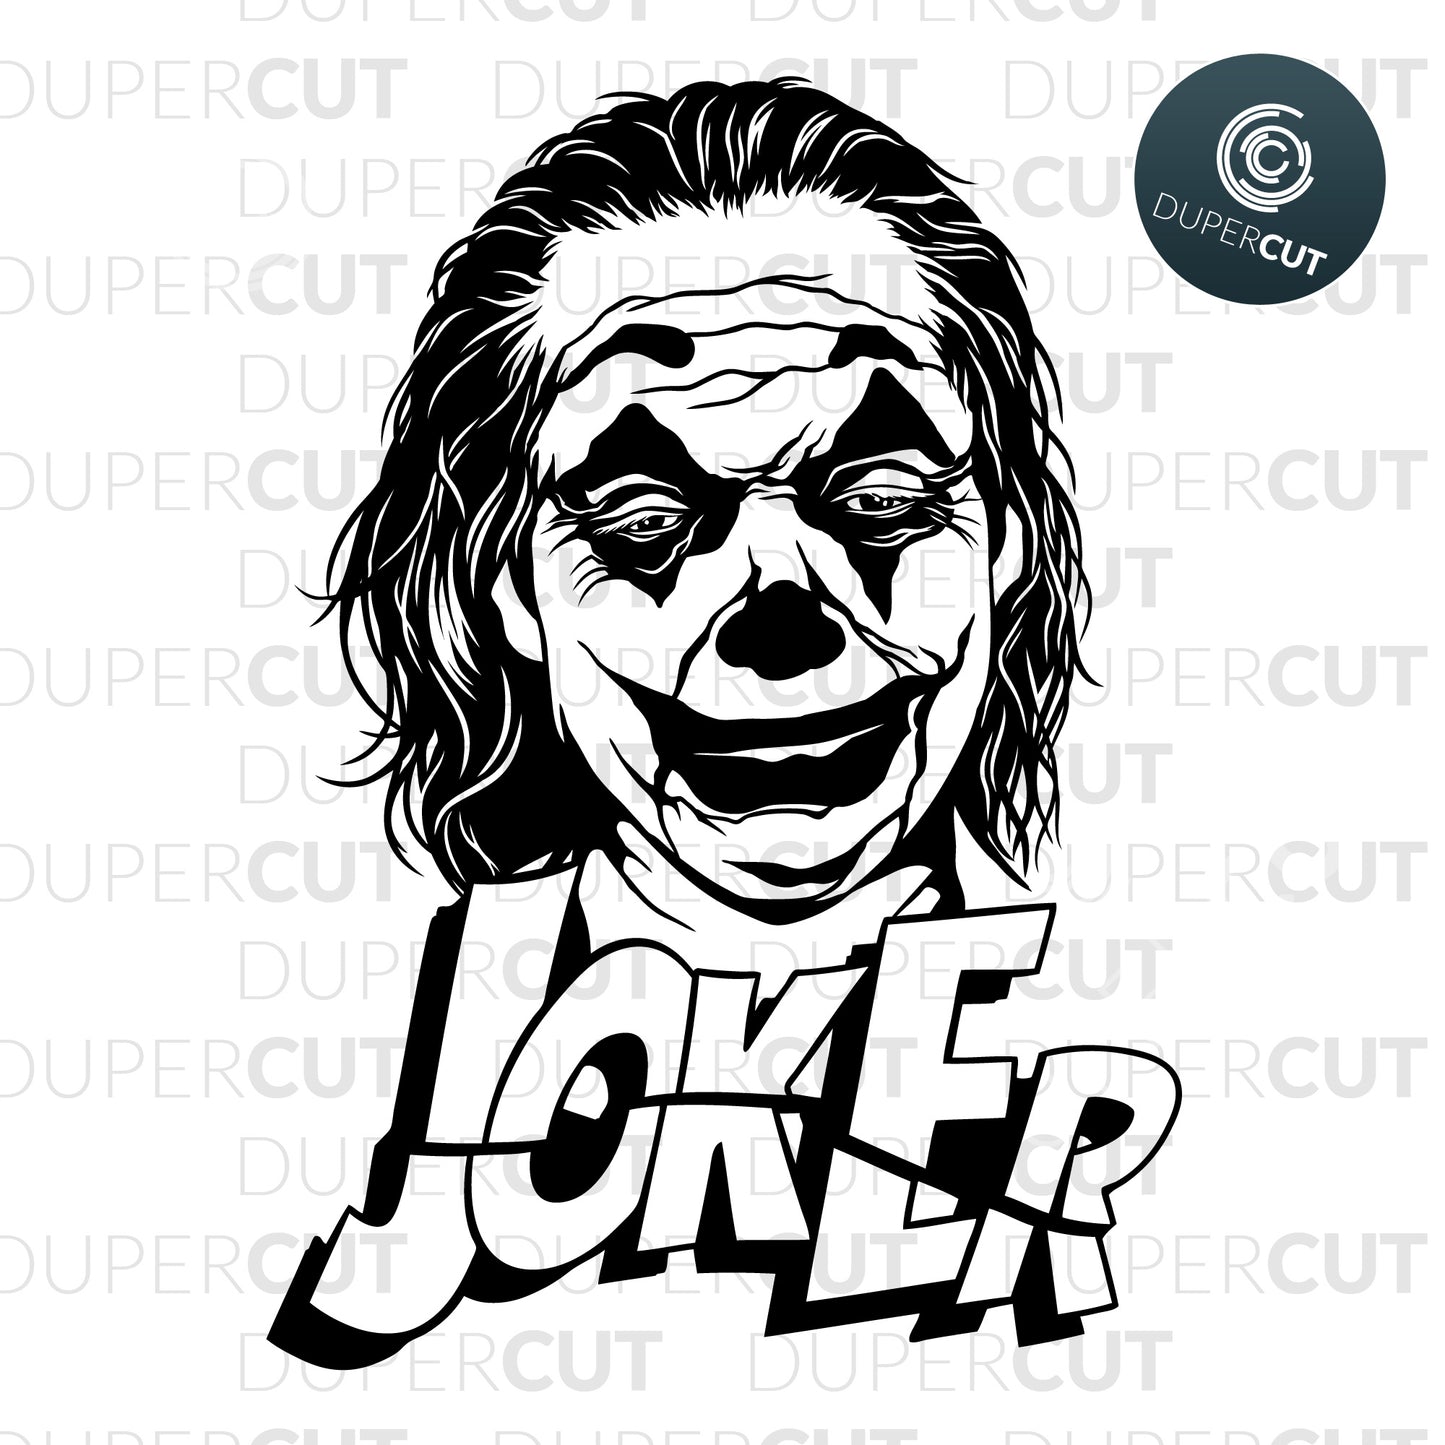 Joker movie portrait. DIY black and white poster. Paper cutting template for commercial use. SVG files for Silhouette Cameo, Cricut, Glowforge, DXF for CNC, laser cutting, print on demand